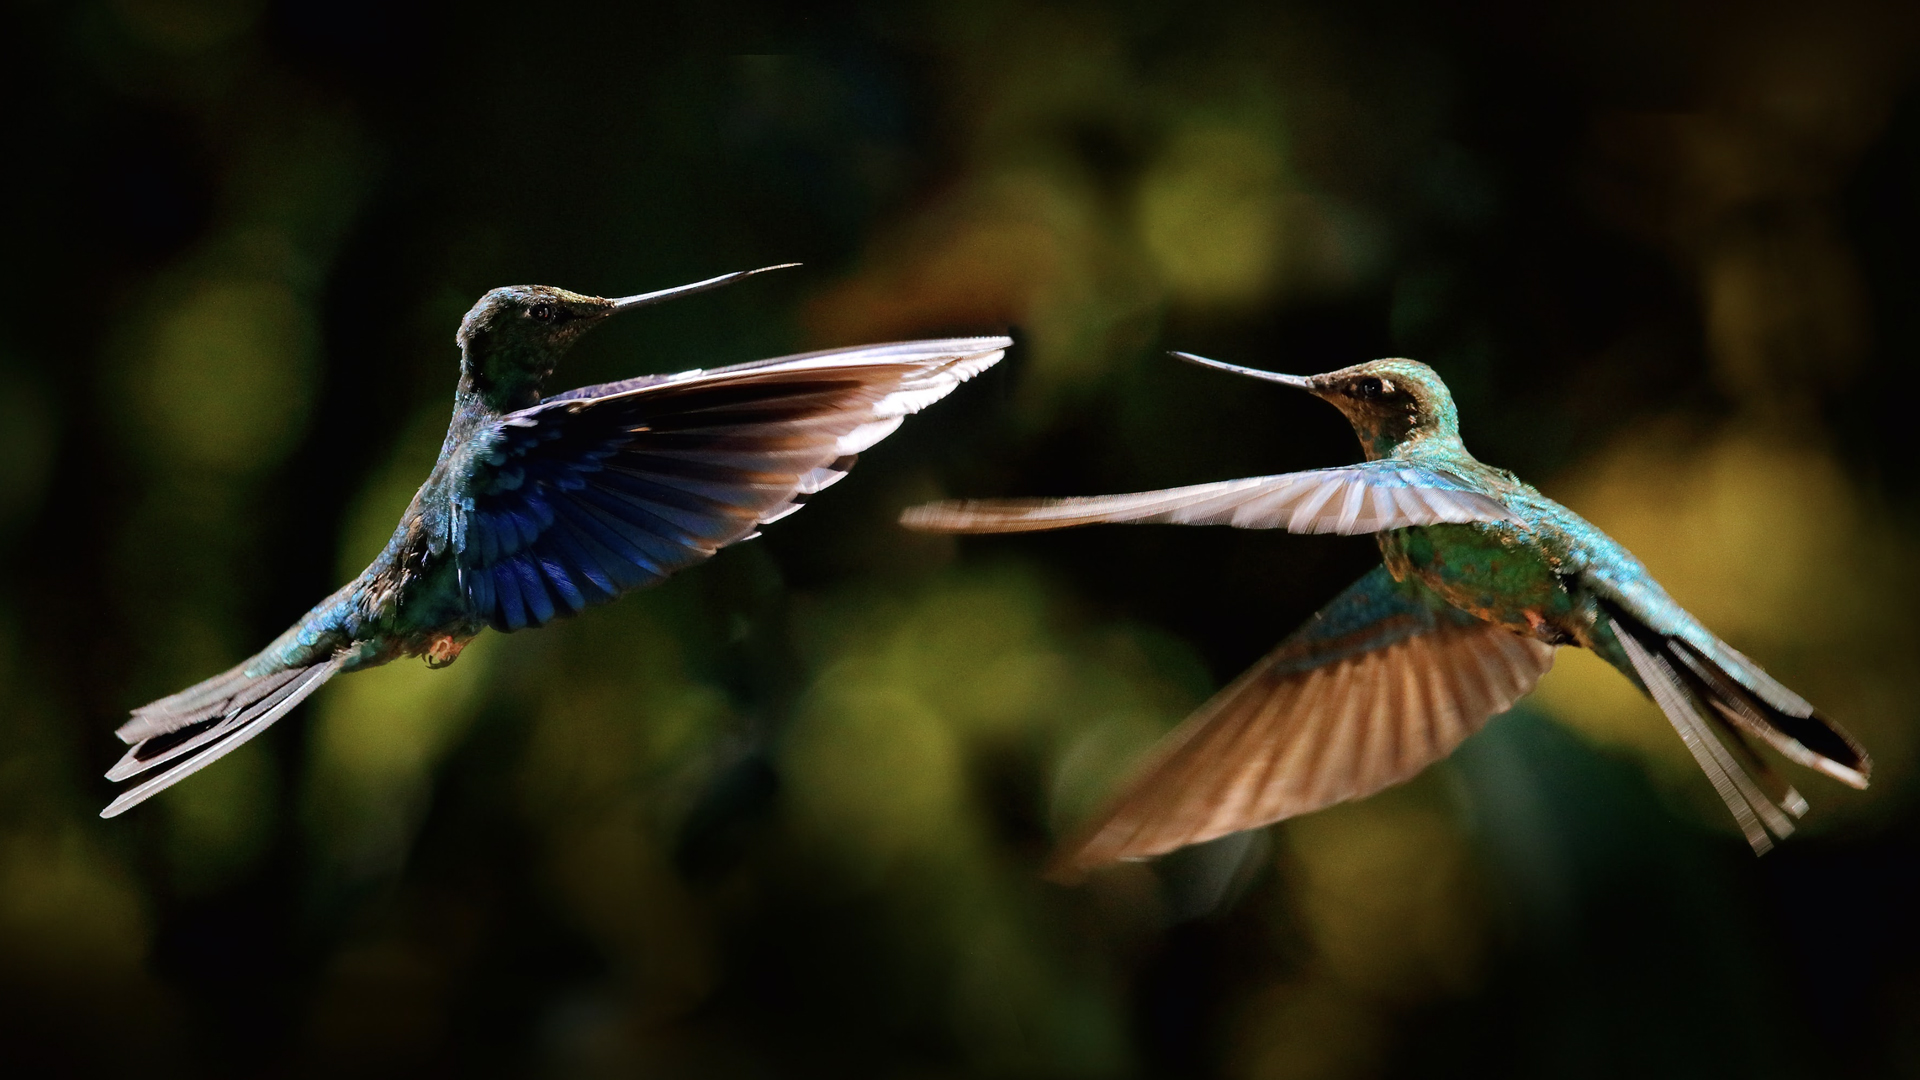 Image of two hummingbirds flying in mid air